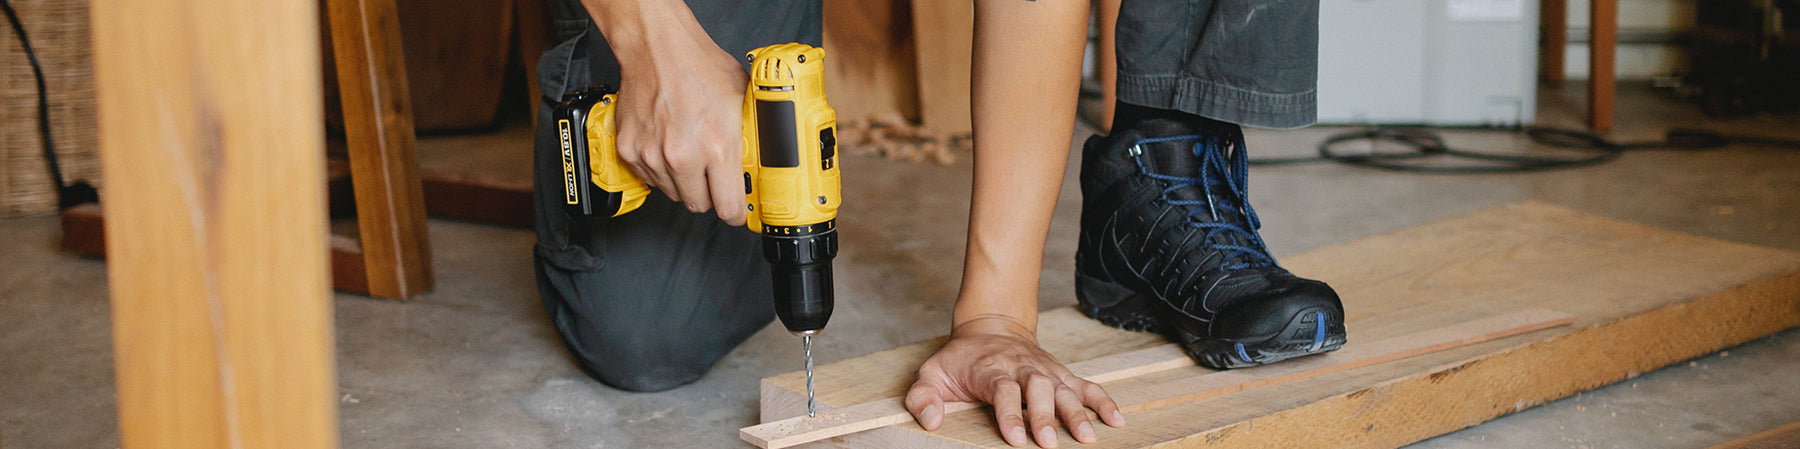 Person drilling a yellow and black power drill into a piece of wood.